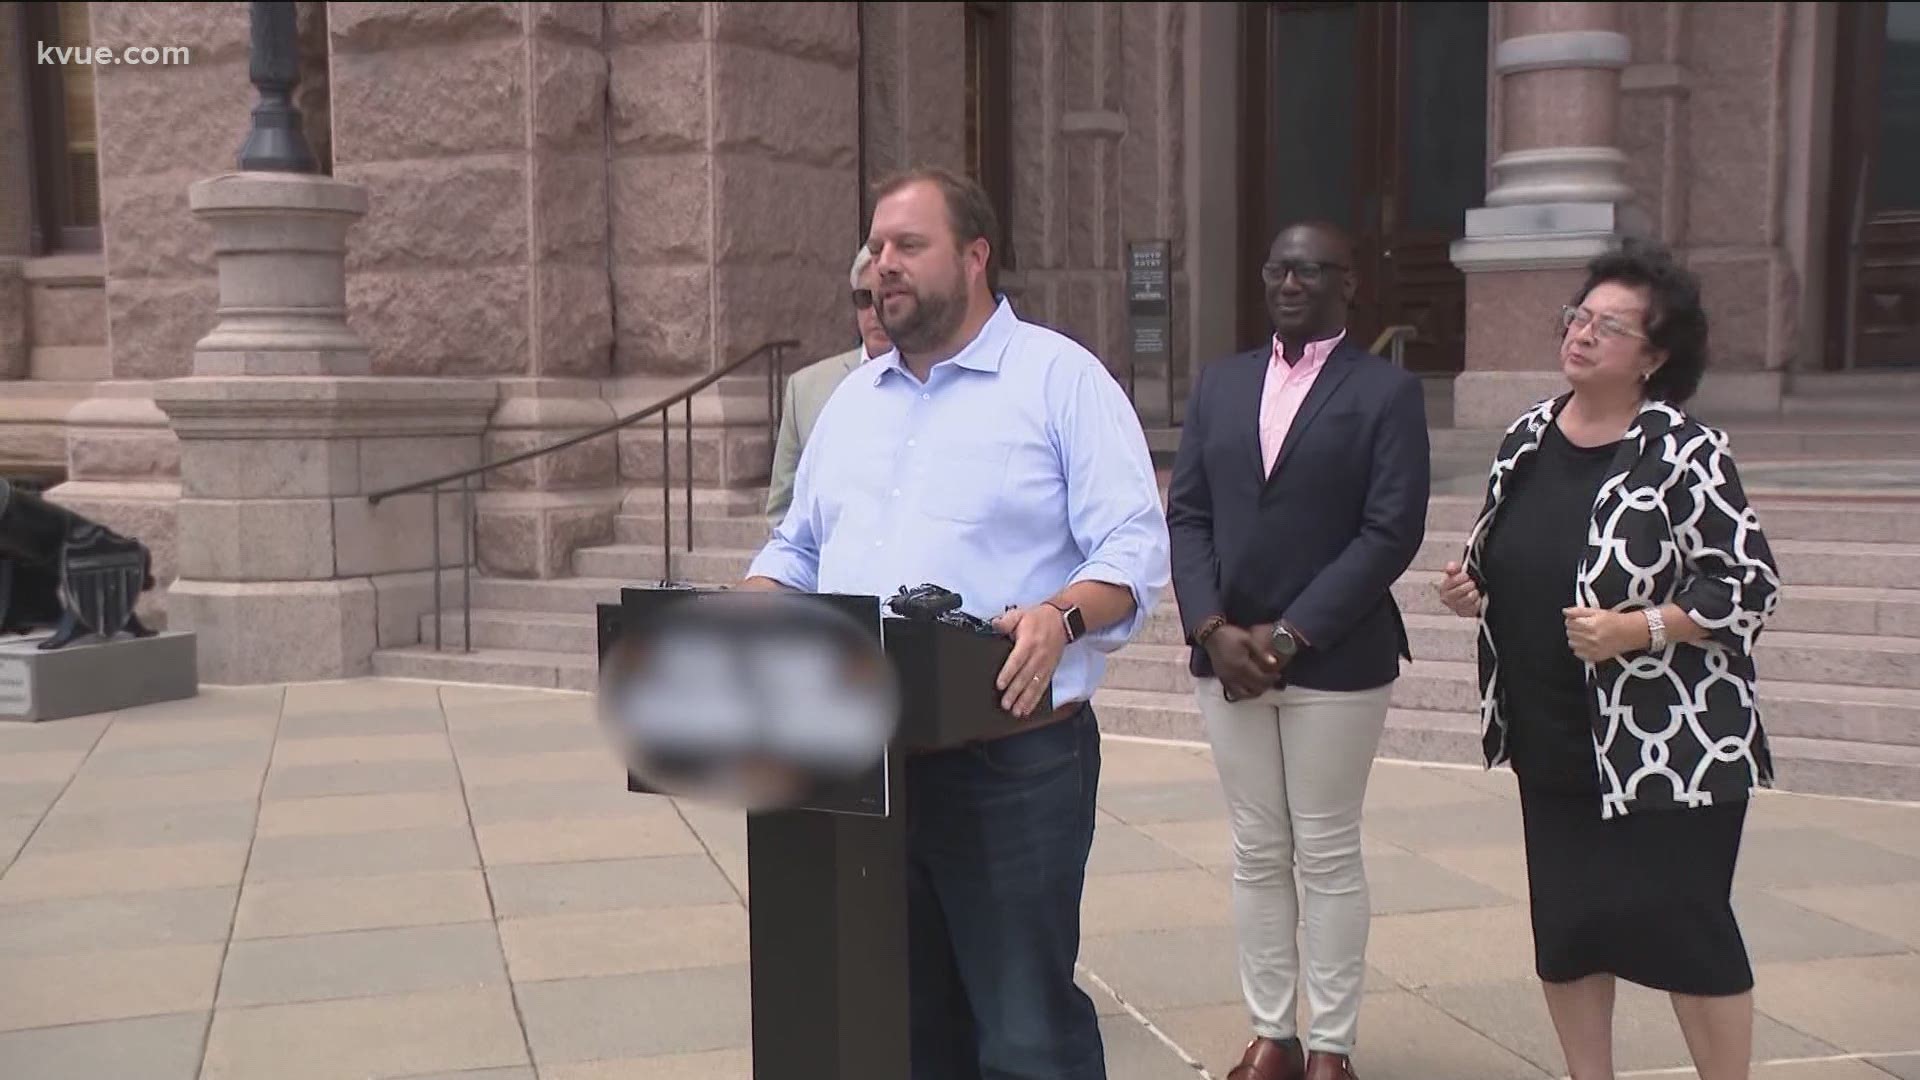 Texas Democratic leaders say they want lawmakers to focus on the power grid, voting rights, health care and more instead of the border.